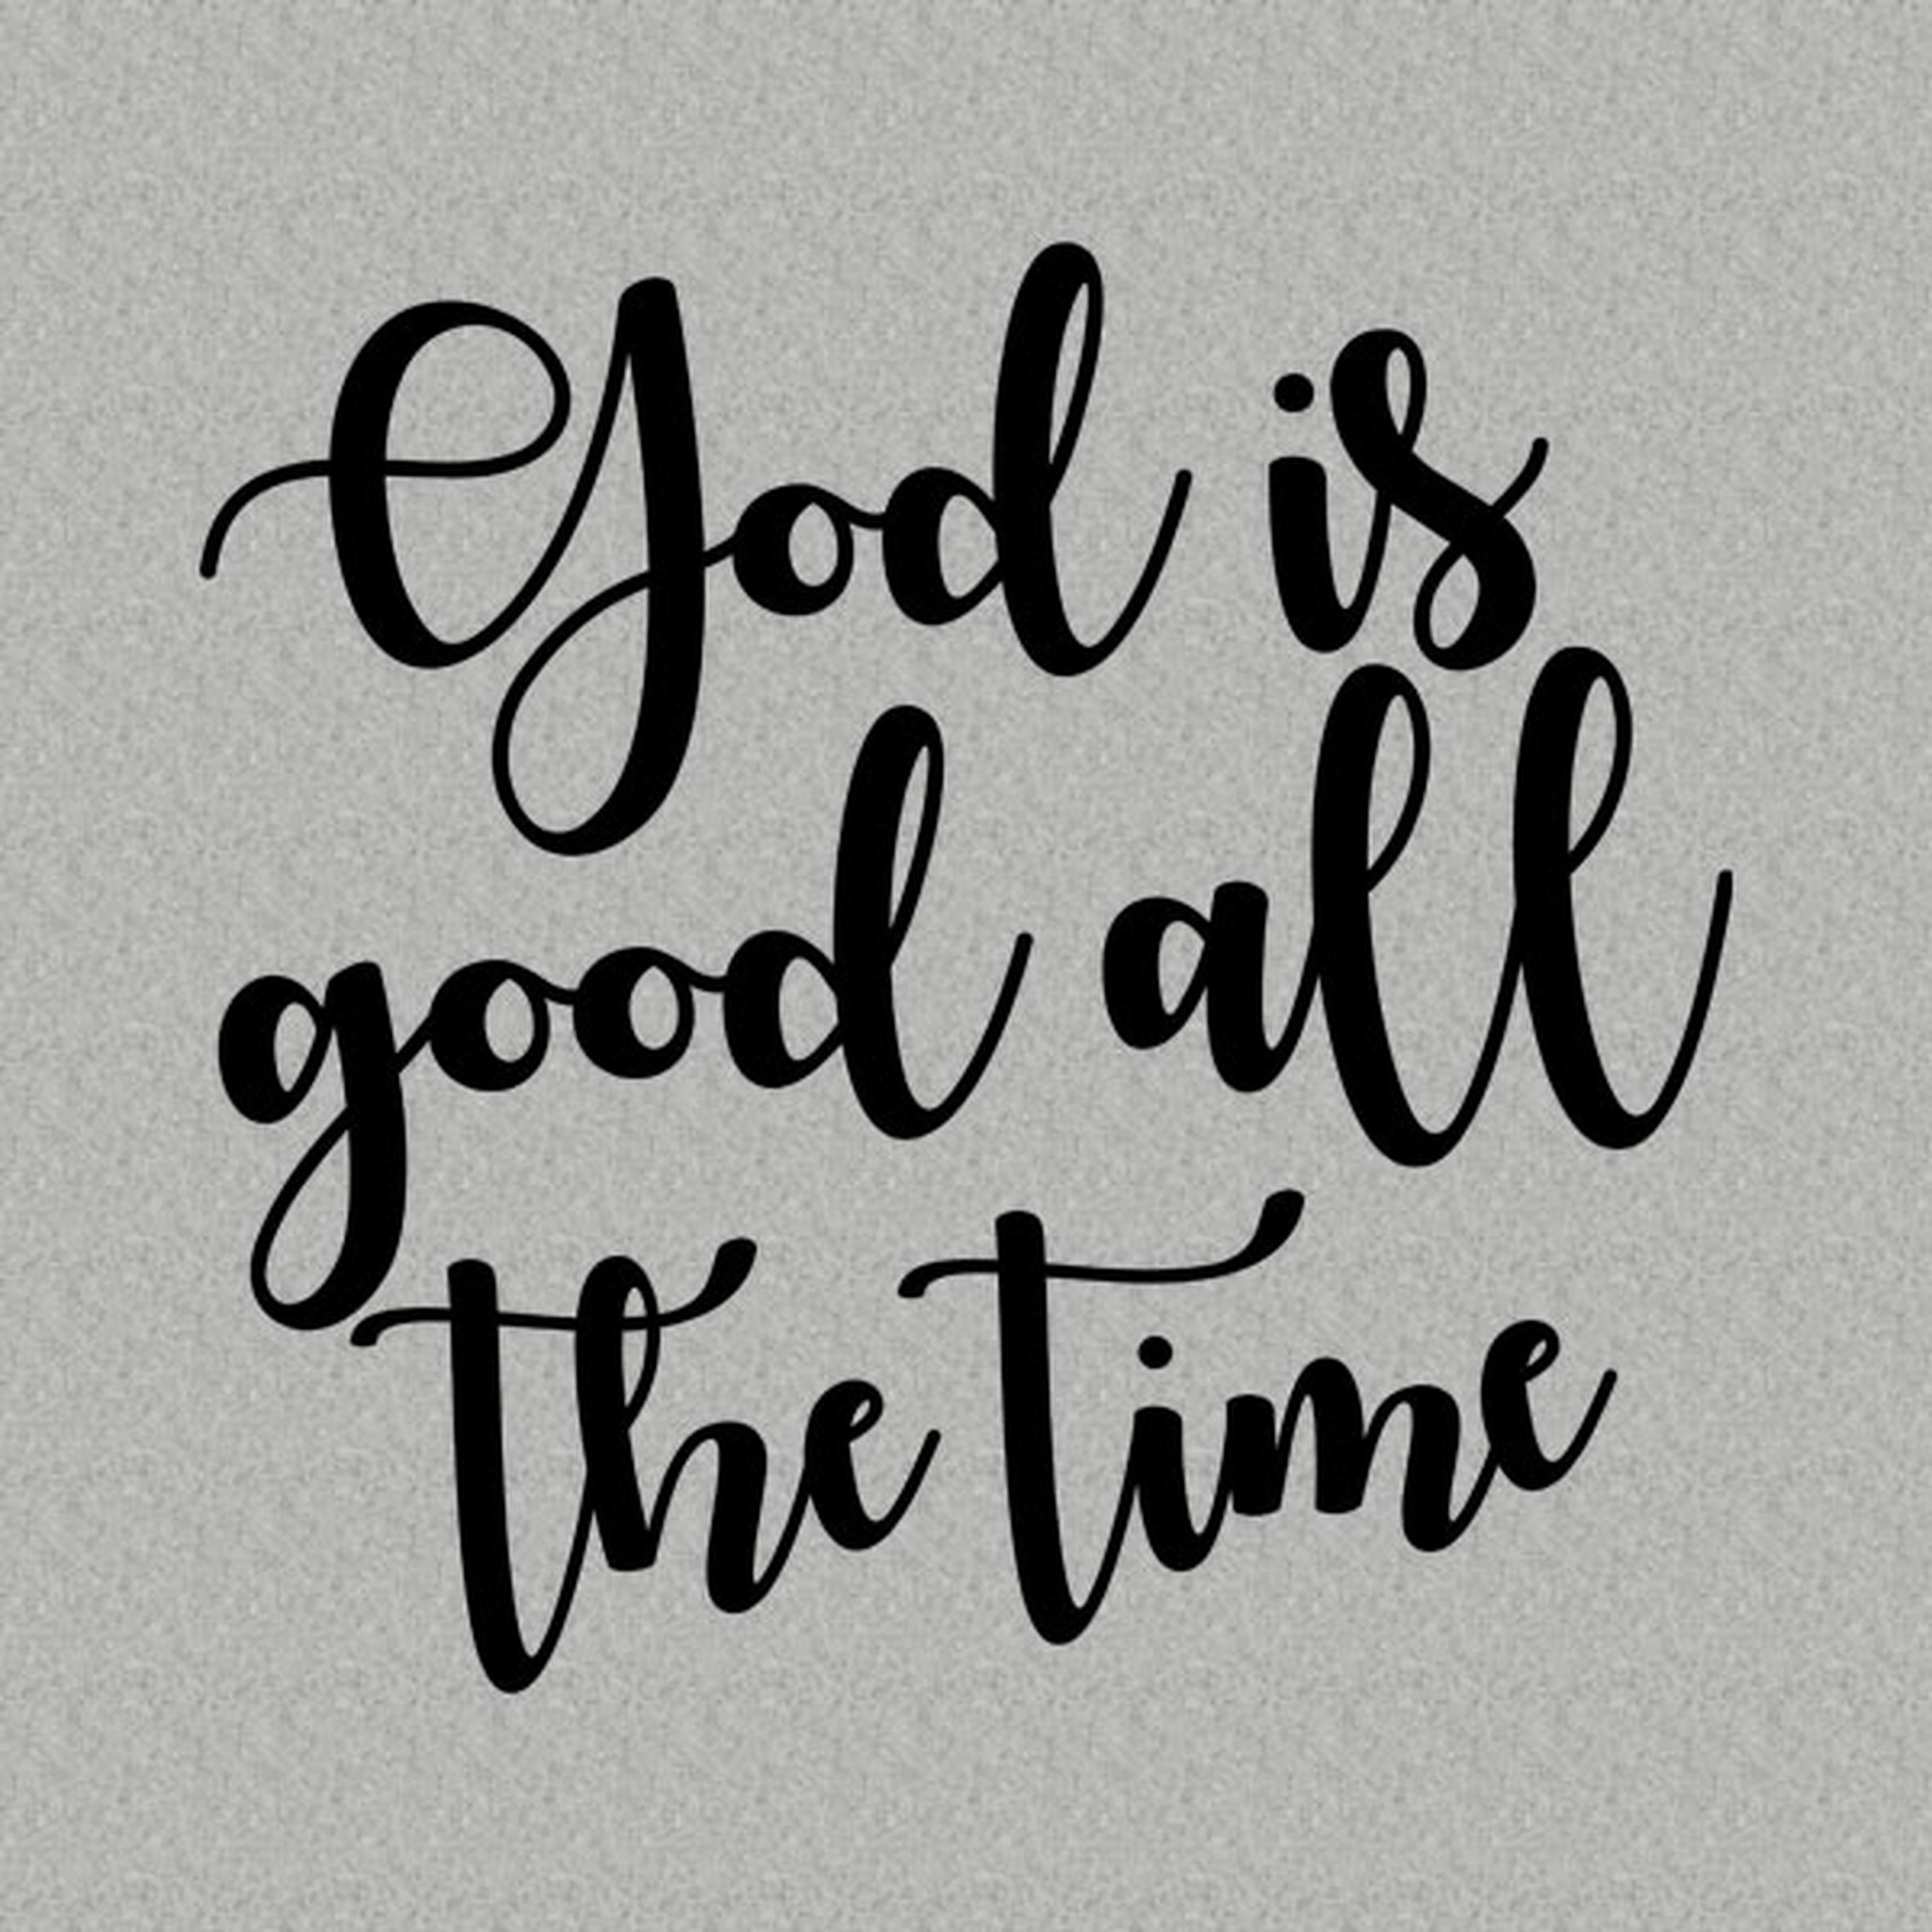 God is good all the time - T-shirt